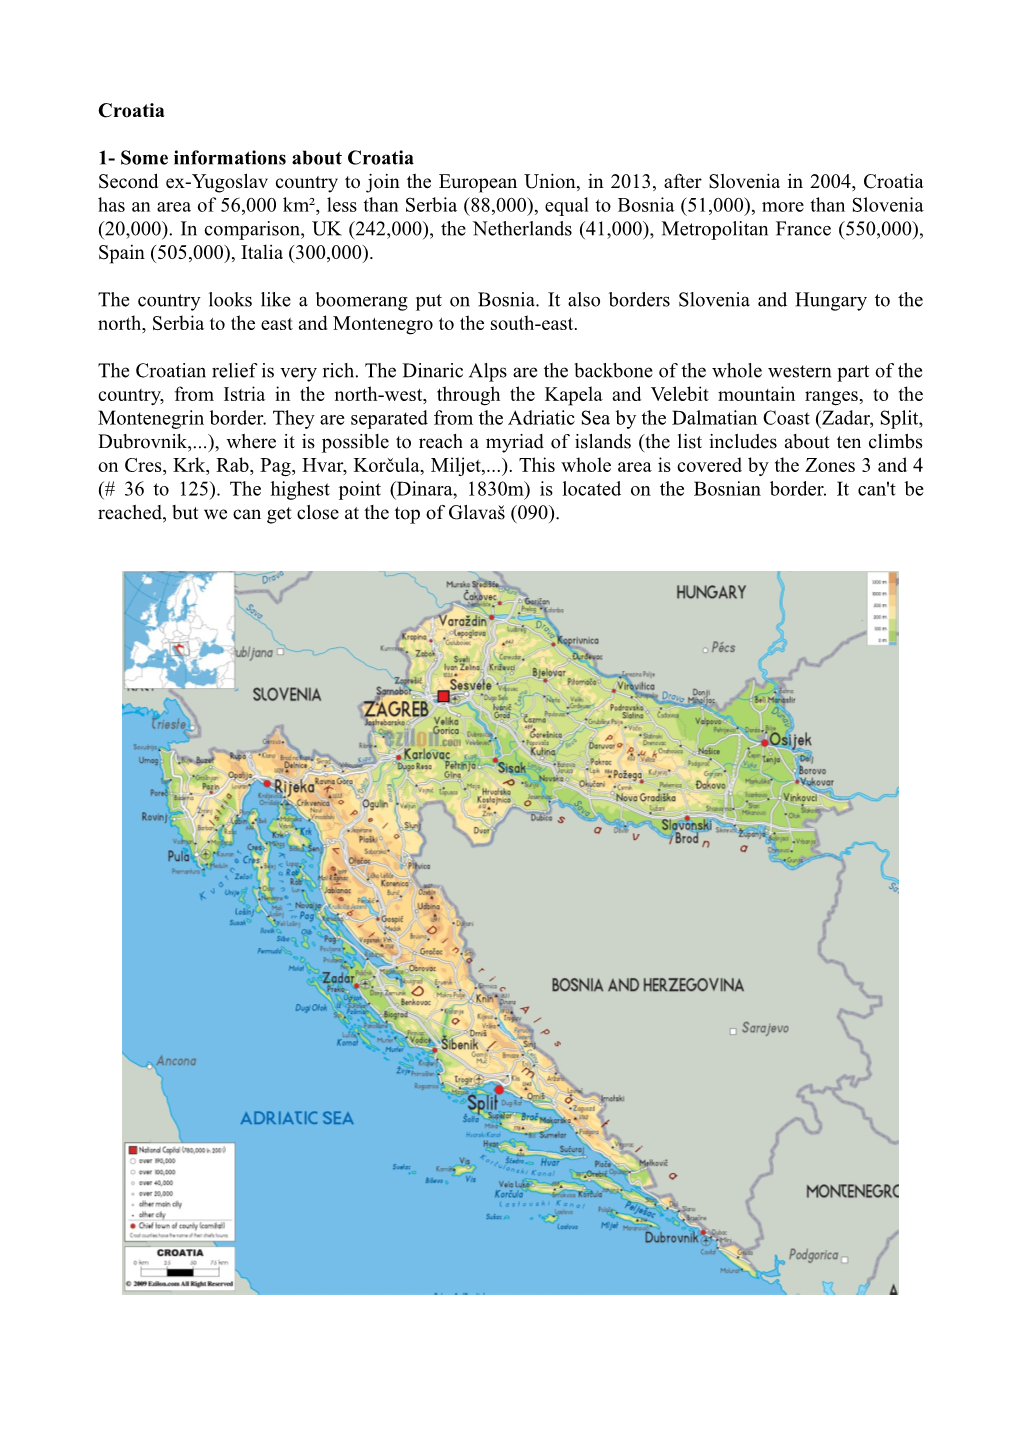 Some Informations About Croatia Second Ex-Yugoslav Country to Join